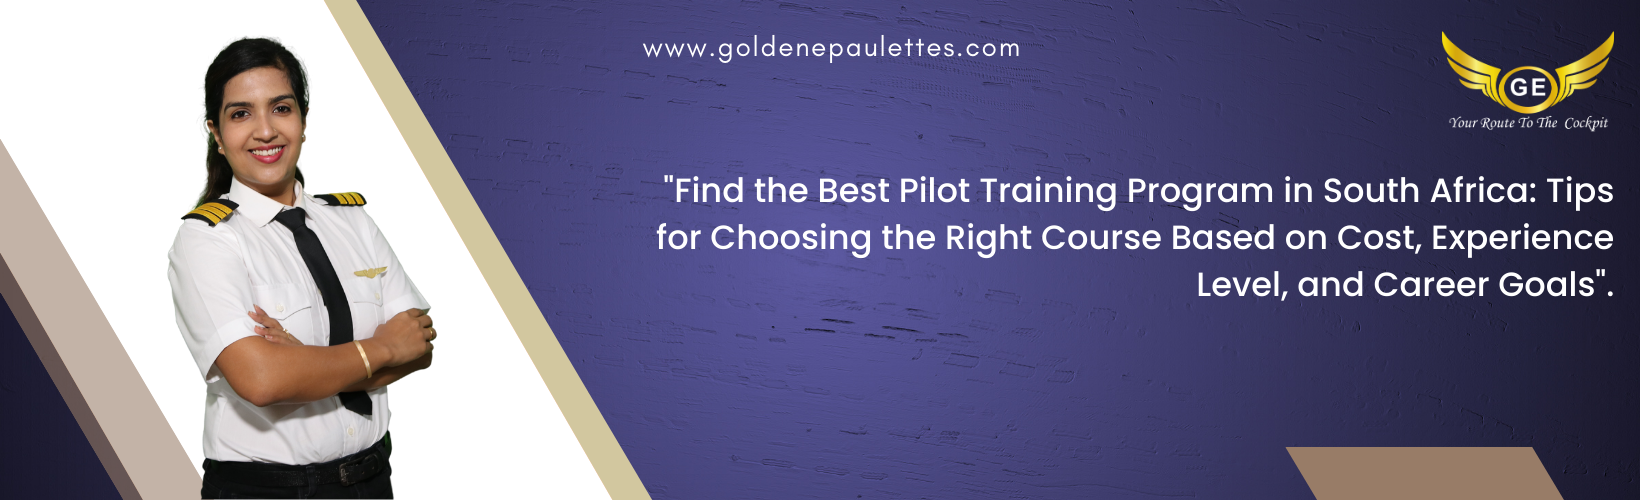 Tips for Choosing the Right Pilot Training Program in South Africa